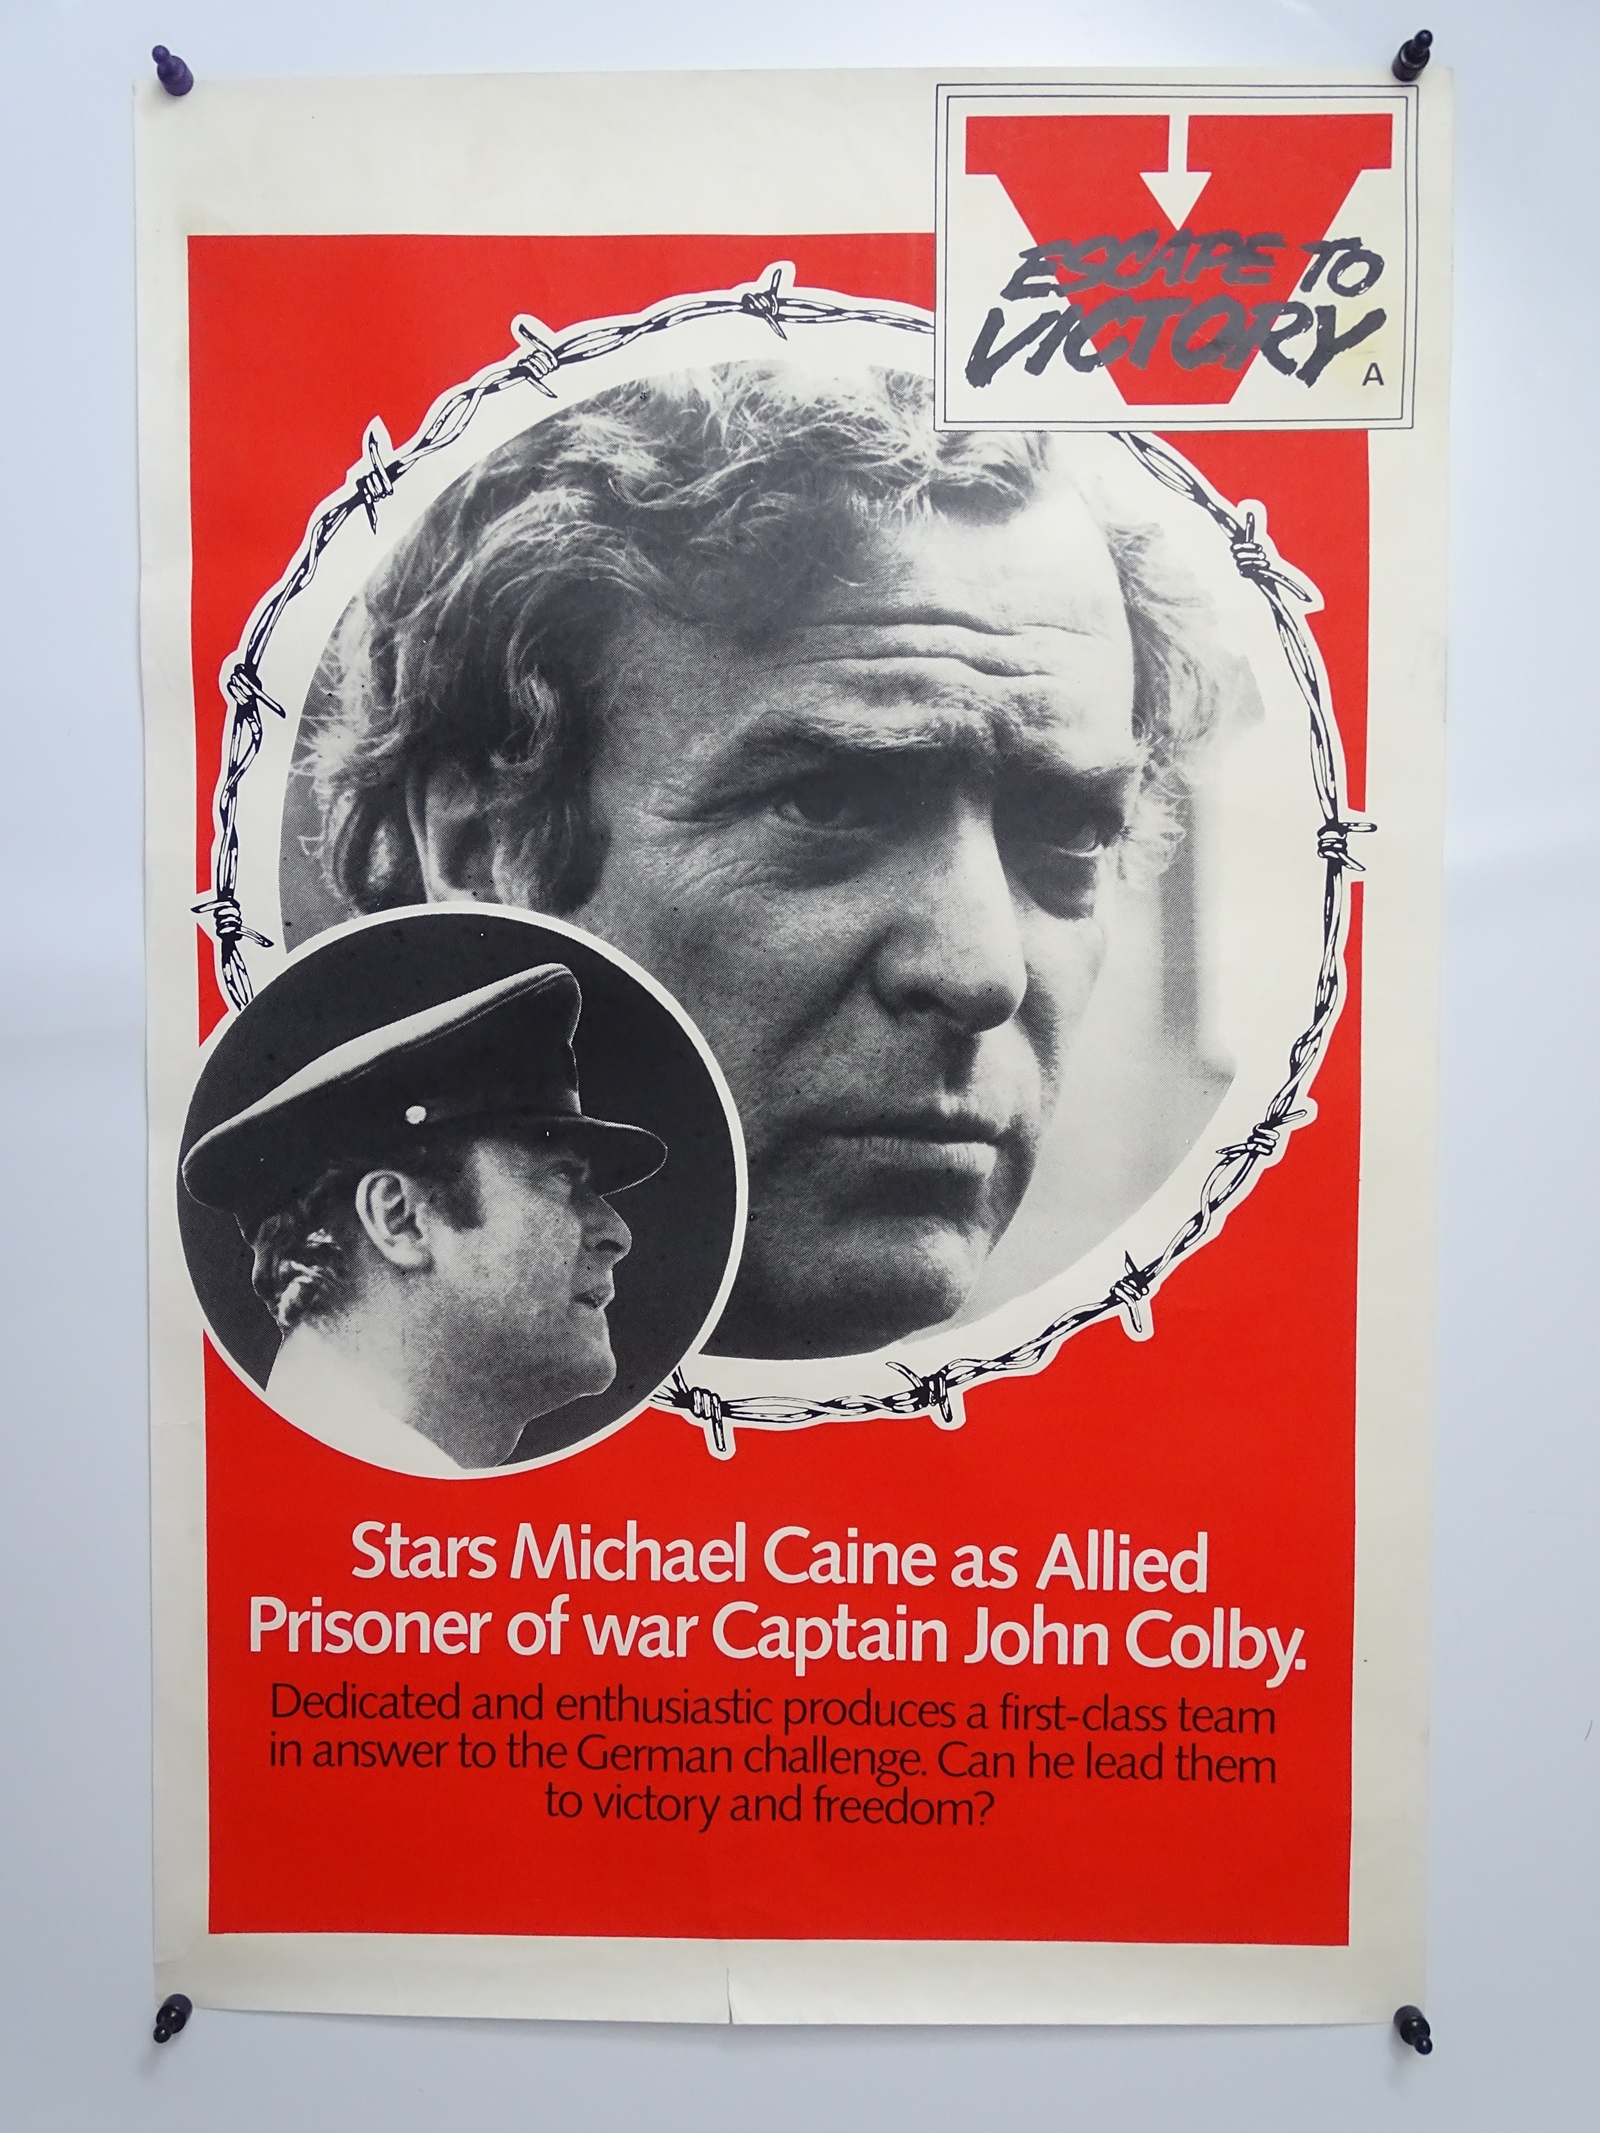 ESCAPE TO VICTORY (1981) 2 x Marler Hayley Double Crown Film Posters - for this classic film